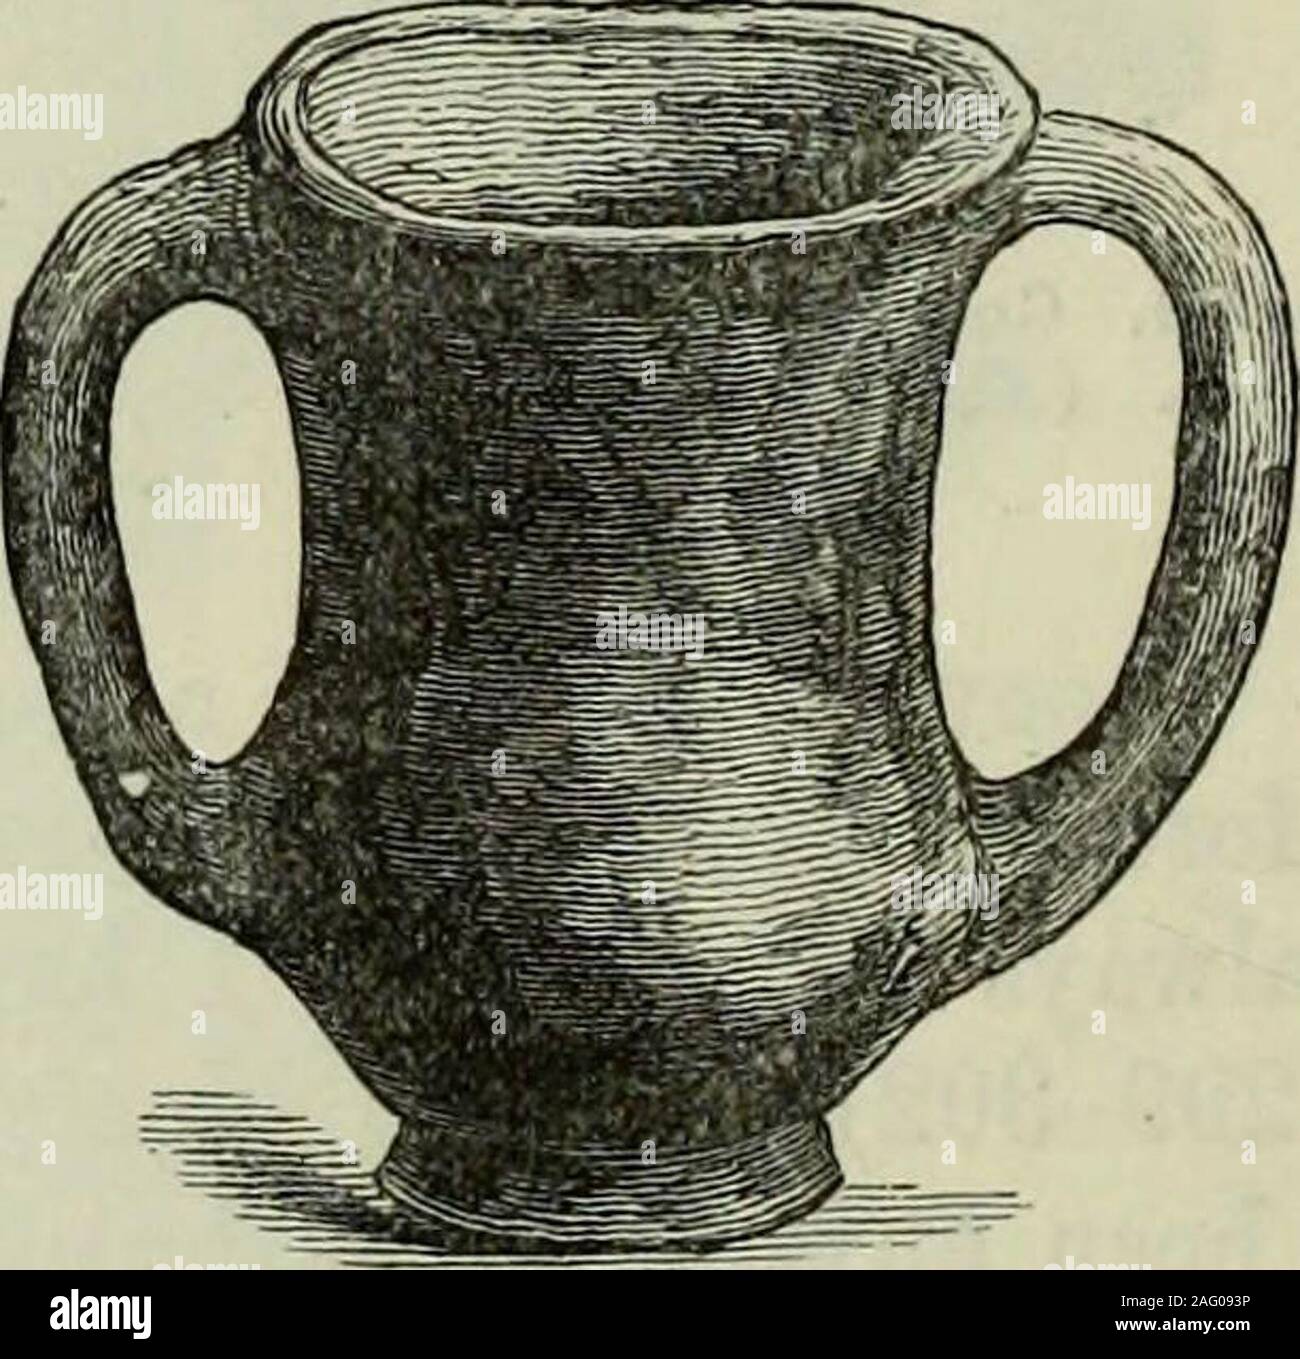 . Ilios : the city and country of the Trojans : the results of researches and discoveries on the site of Troy and throughout the Troad in the years 1871-72-73-78-79, including an autobiography of the author. No. 324. Cup with two handles. (1: 3 actual size.Depth, 26 ft.). No. 323. Goblet with two handles (8eVa;d/iiJ(/cun-eAAoi). No. 325. Goblet with two handles. (1 :3 actual size. (About 1:4 actual size. Depth, 26ft.) Depth, 26ft.) the burnt city. The shape represented by No. 324 also occurs very fre-quently, and still more abundant is the form No. 325, which in the upperpre-historic cities ha Stock Photo